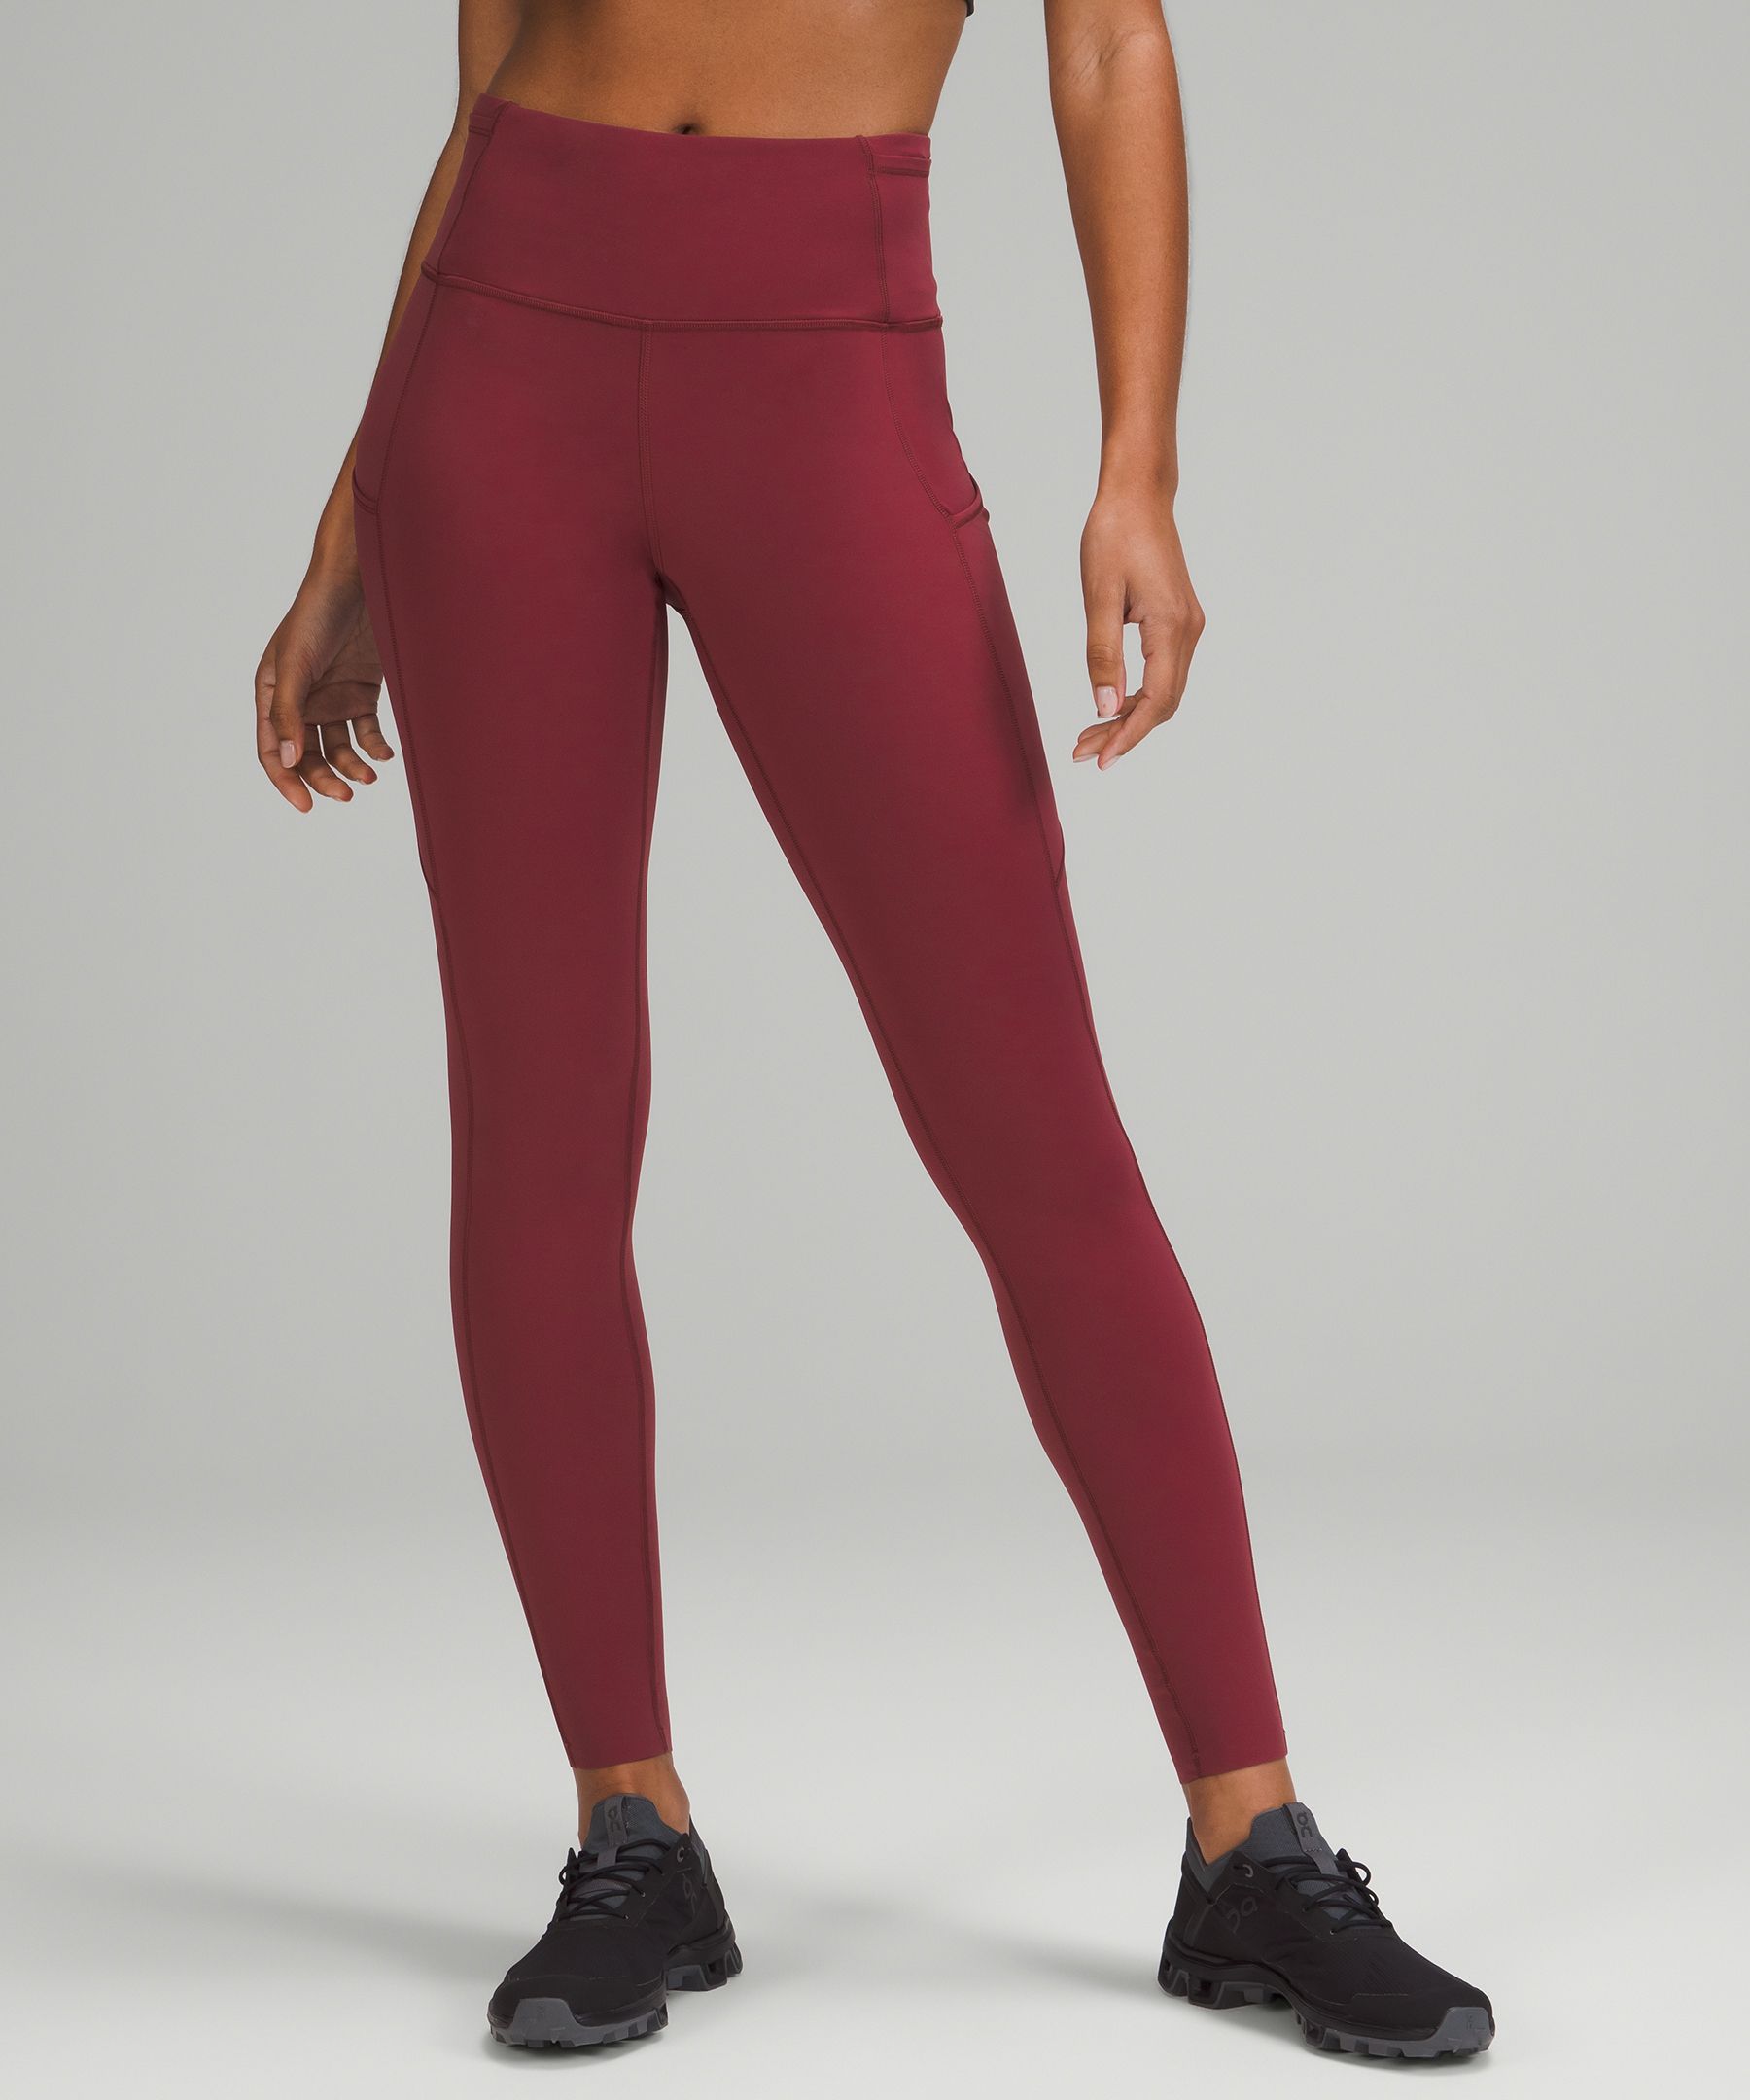 Lululemon Fast and Free High-Rise Tight 28 *Non-Reflective